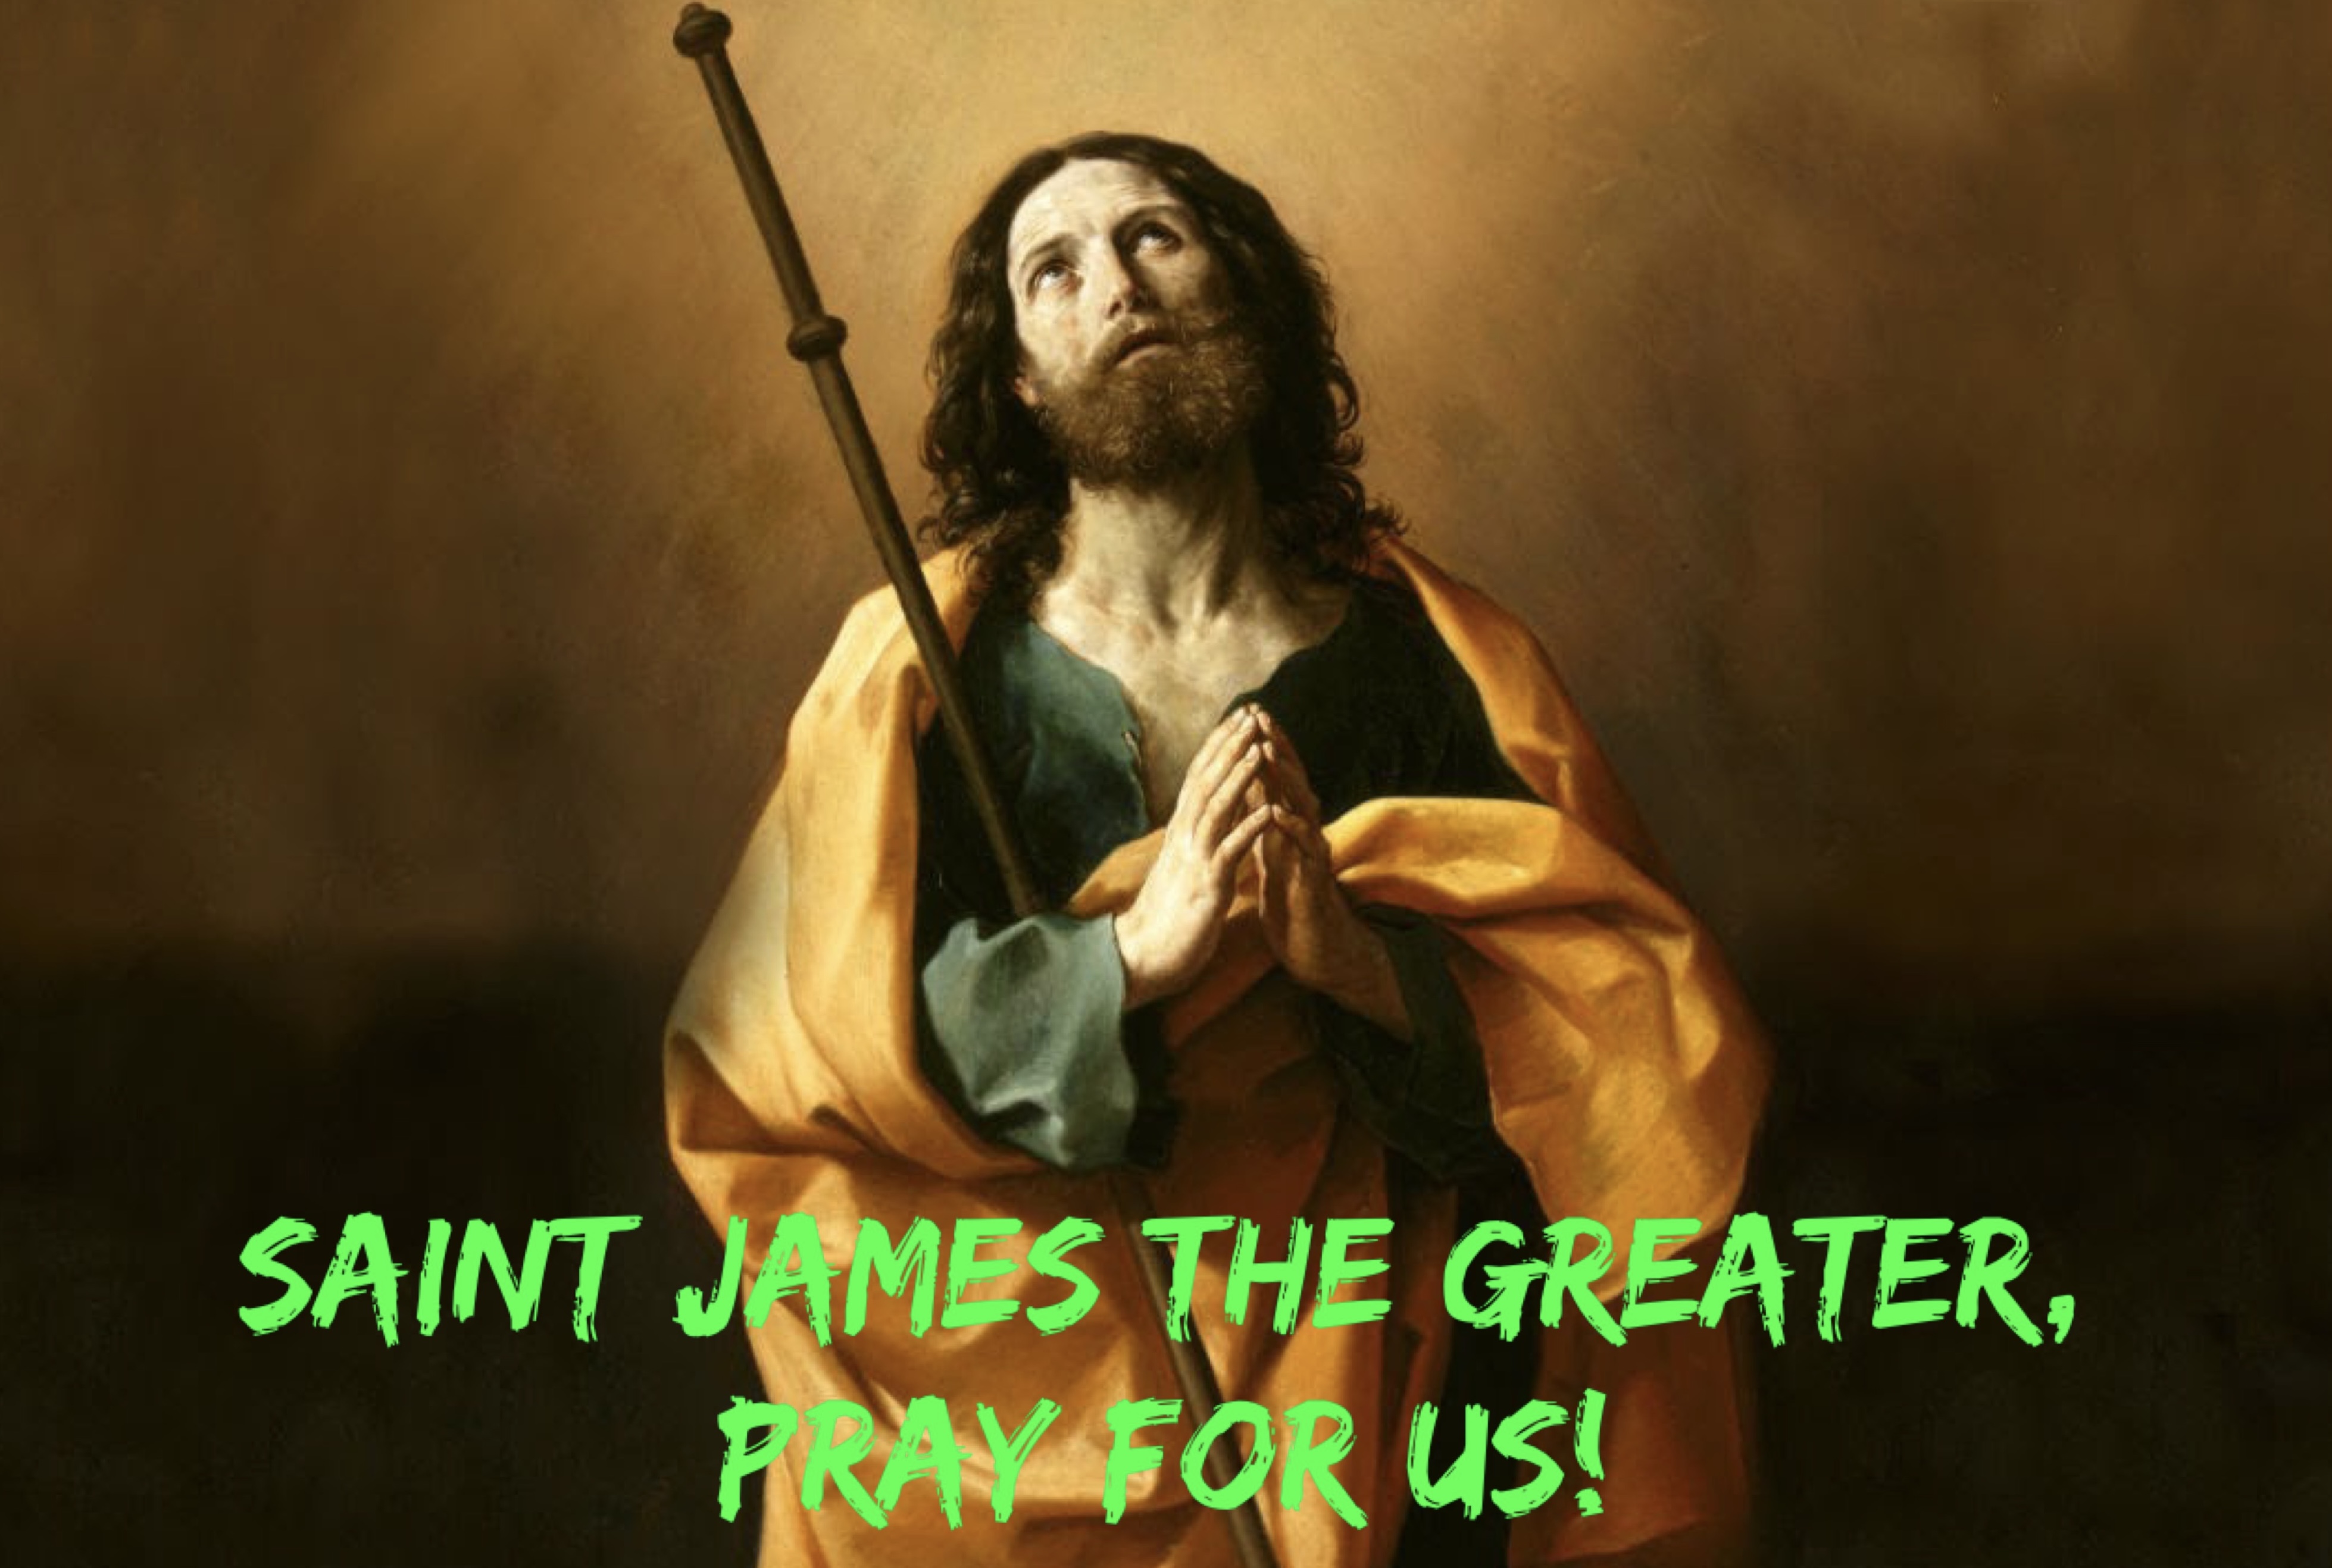 25th July - Saint James the Greater 